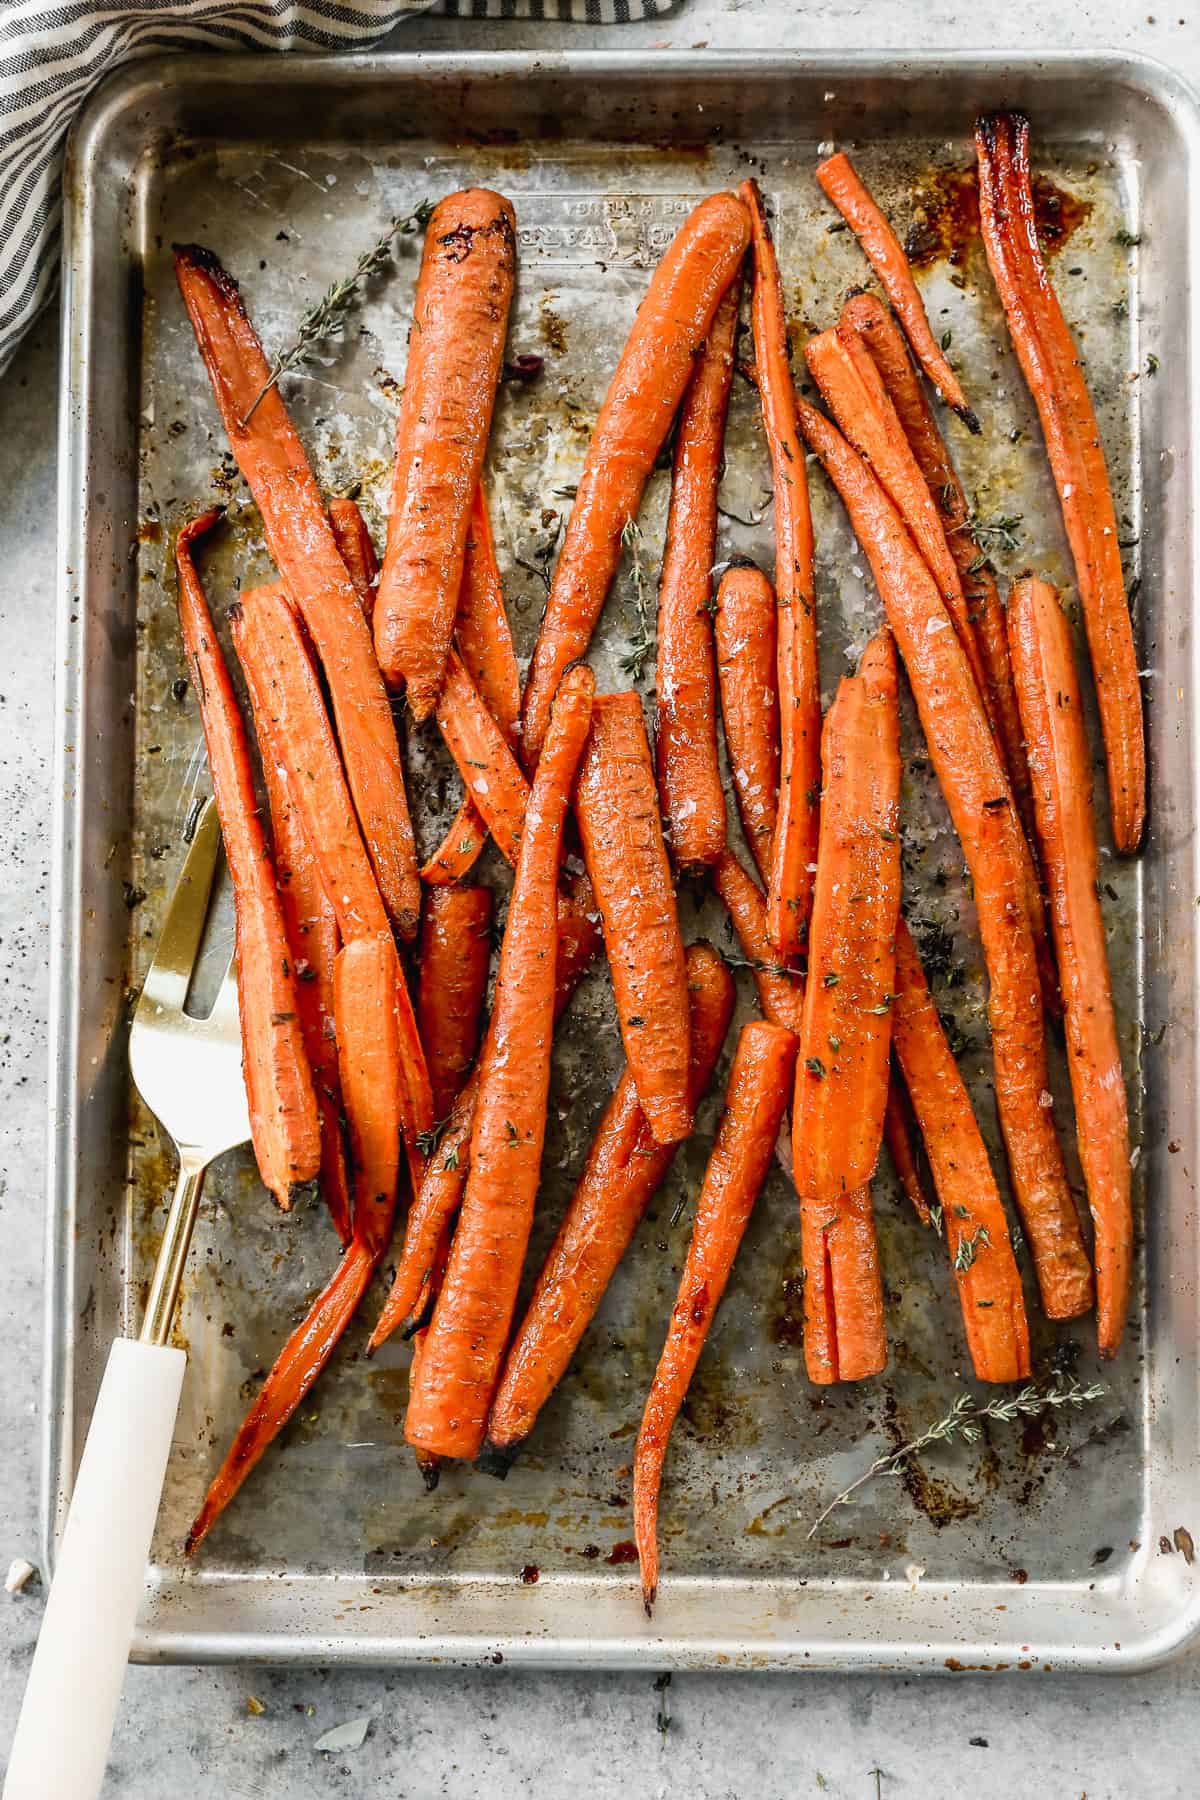 A pan filled with easy Balsamic Roasted Carrots, fresh out of the oven.